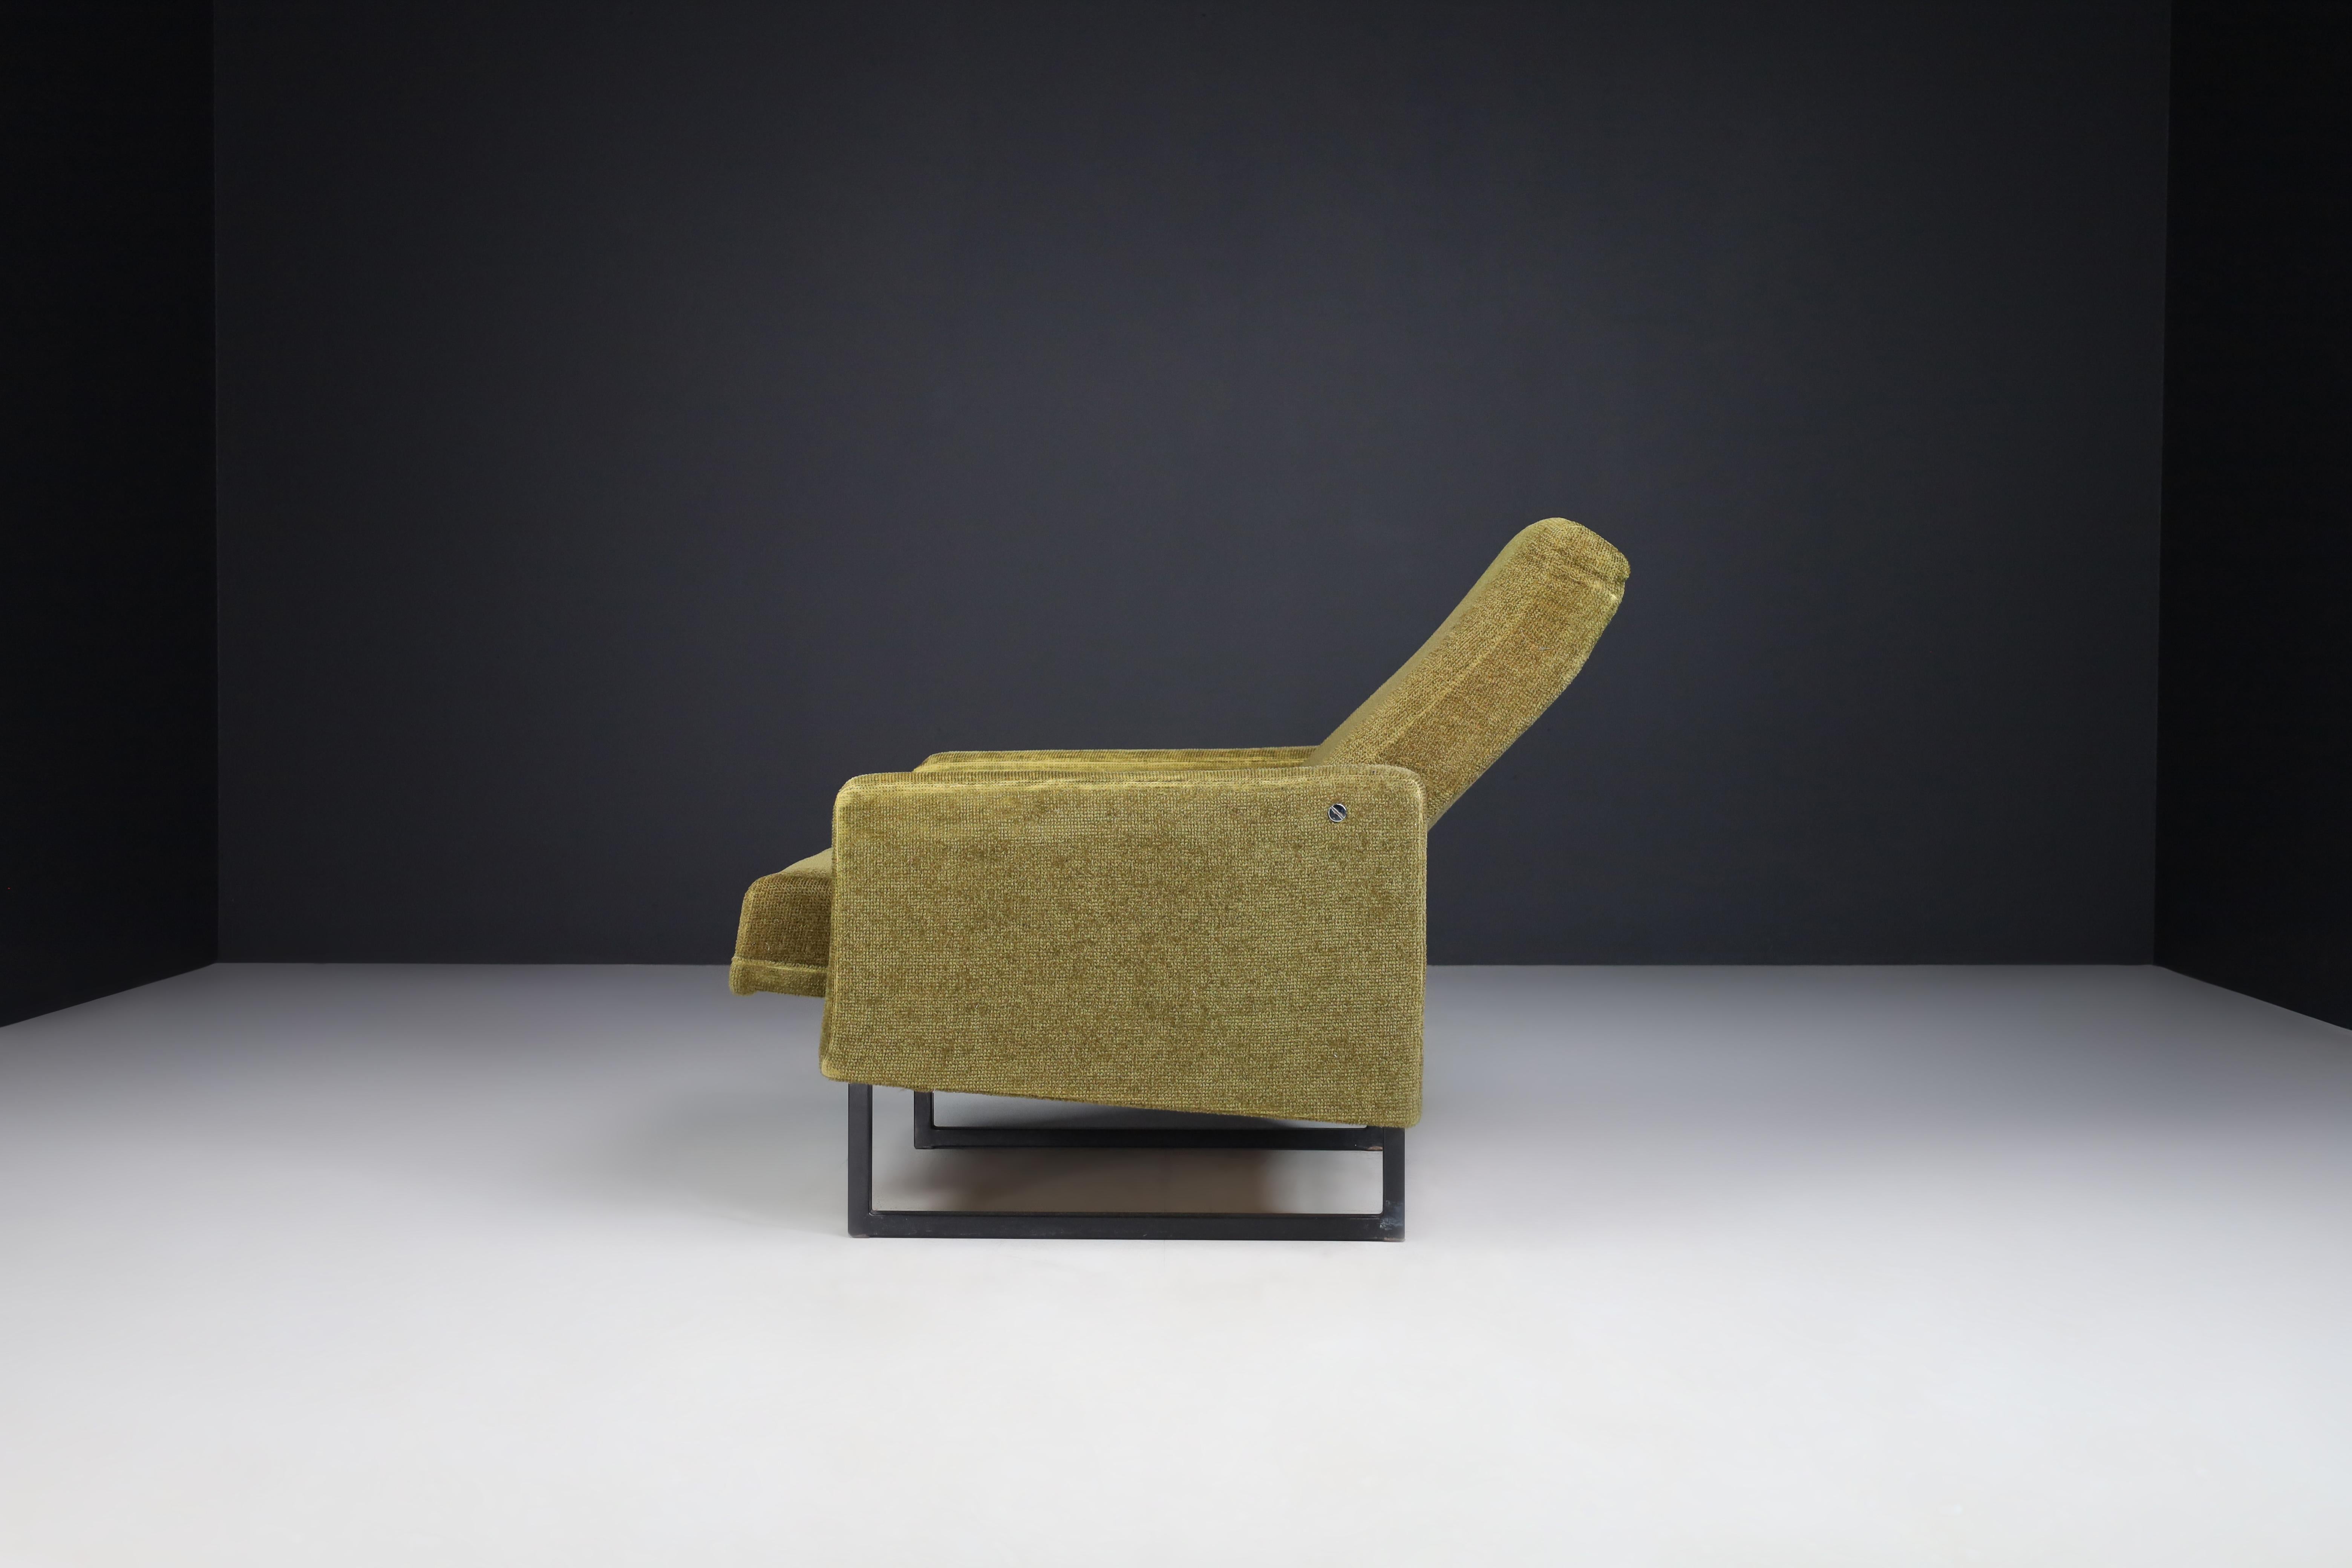 Pair Lounge Chairs by René Jean Caillette for Steiner in Original Fabric, 1963 For Sale 2